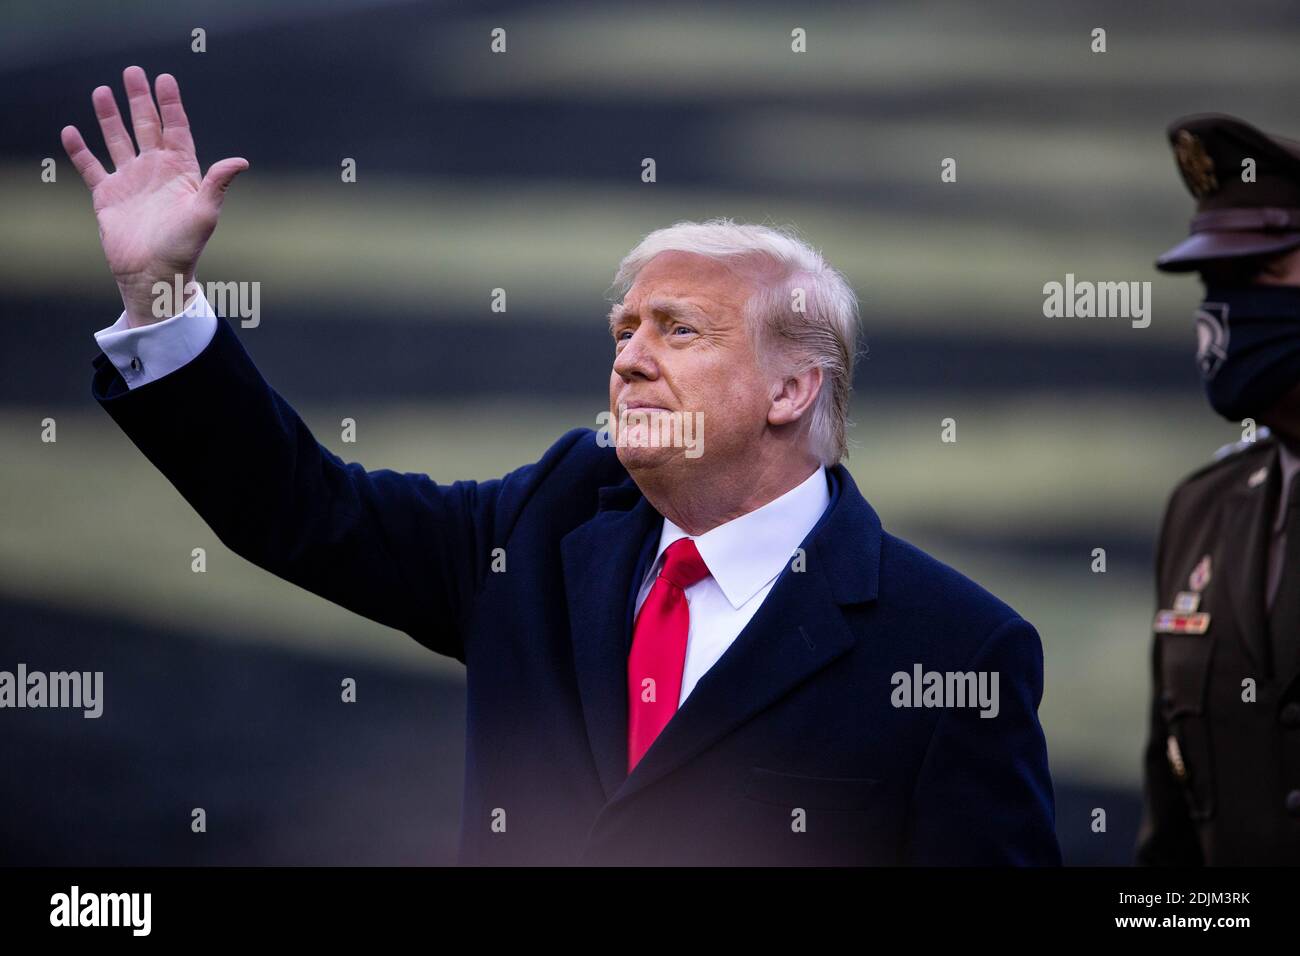 U.S. President Donald Trump waves as he arrives along the side-lines to visit with Army fans at the 121st Army-Navy football game at Michie Stadium December 12, 2019 in West Point, New York. The Army Black Knights shutout the Navy Midshipmen 15-0. Stock Photo